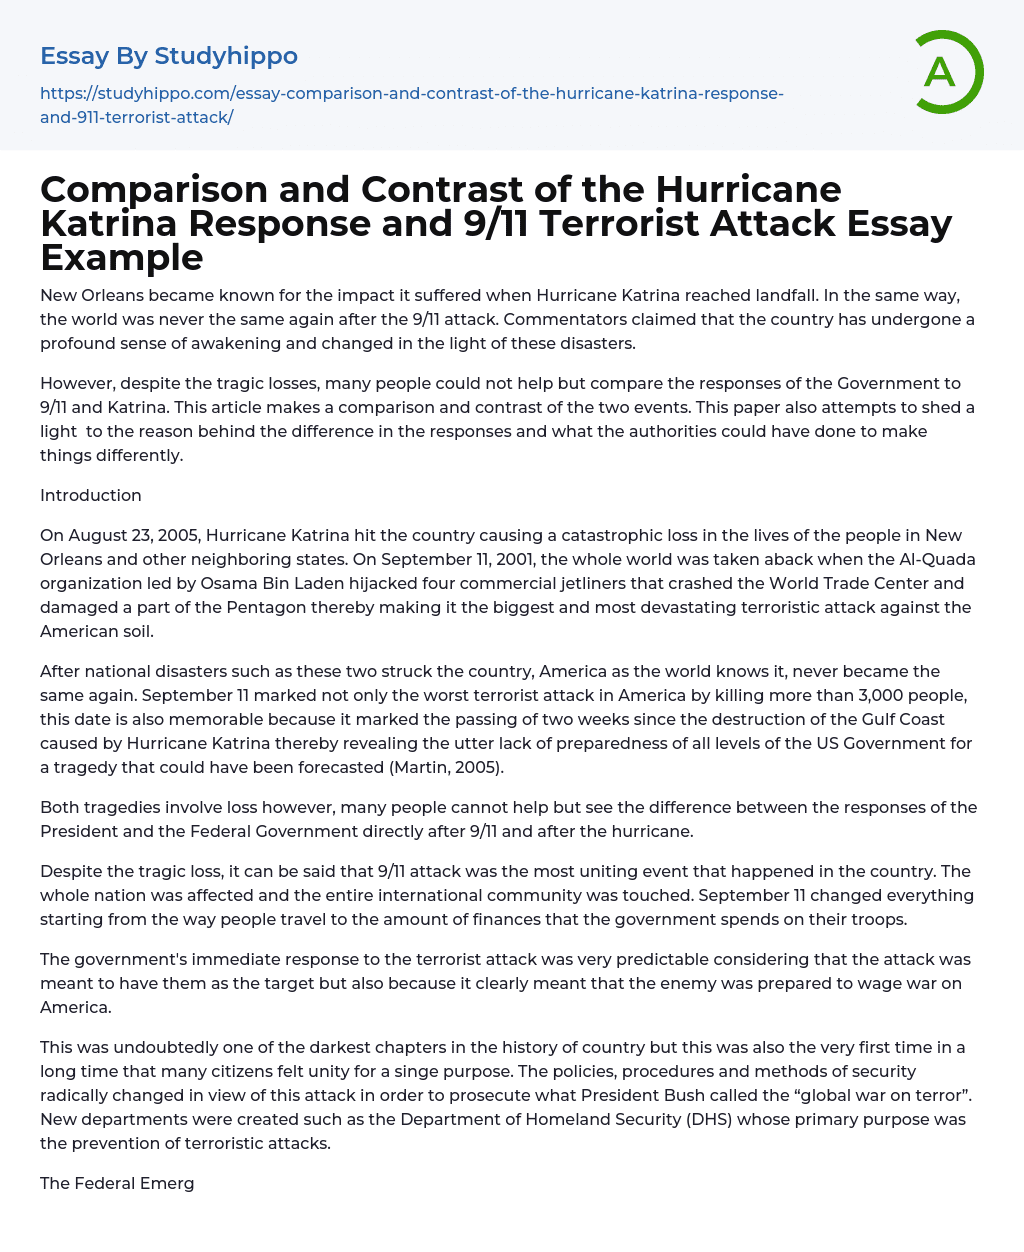 Comparison and Contrast of the Hurricane Katrina Response and 9/11 Terrorist Attack Essay Example